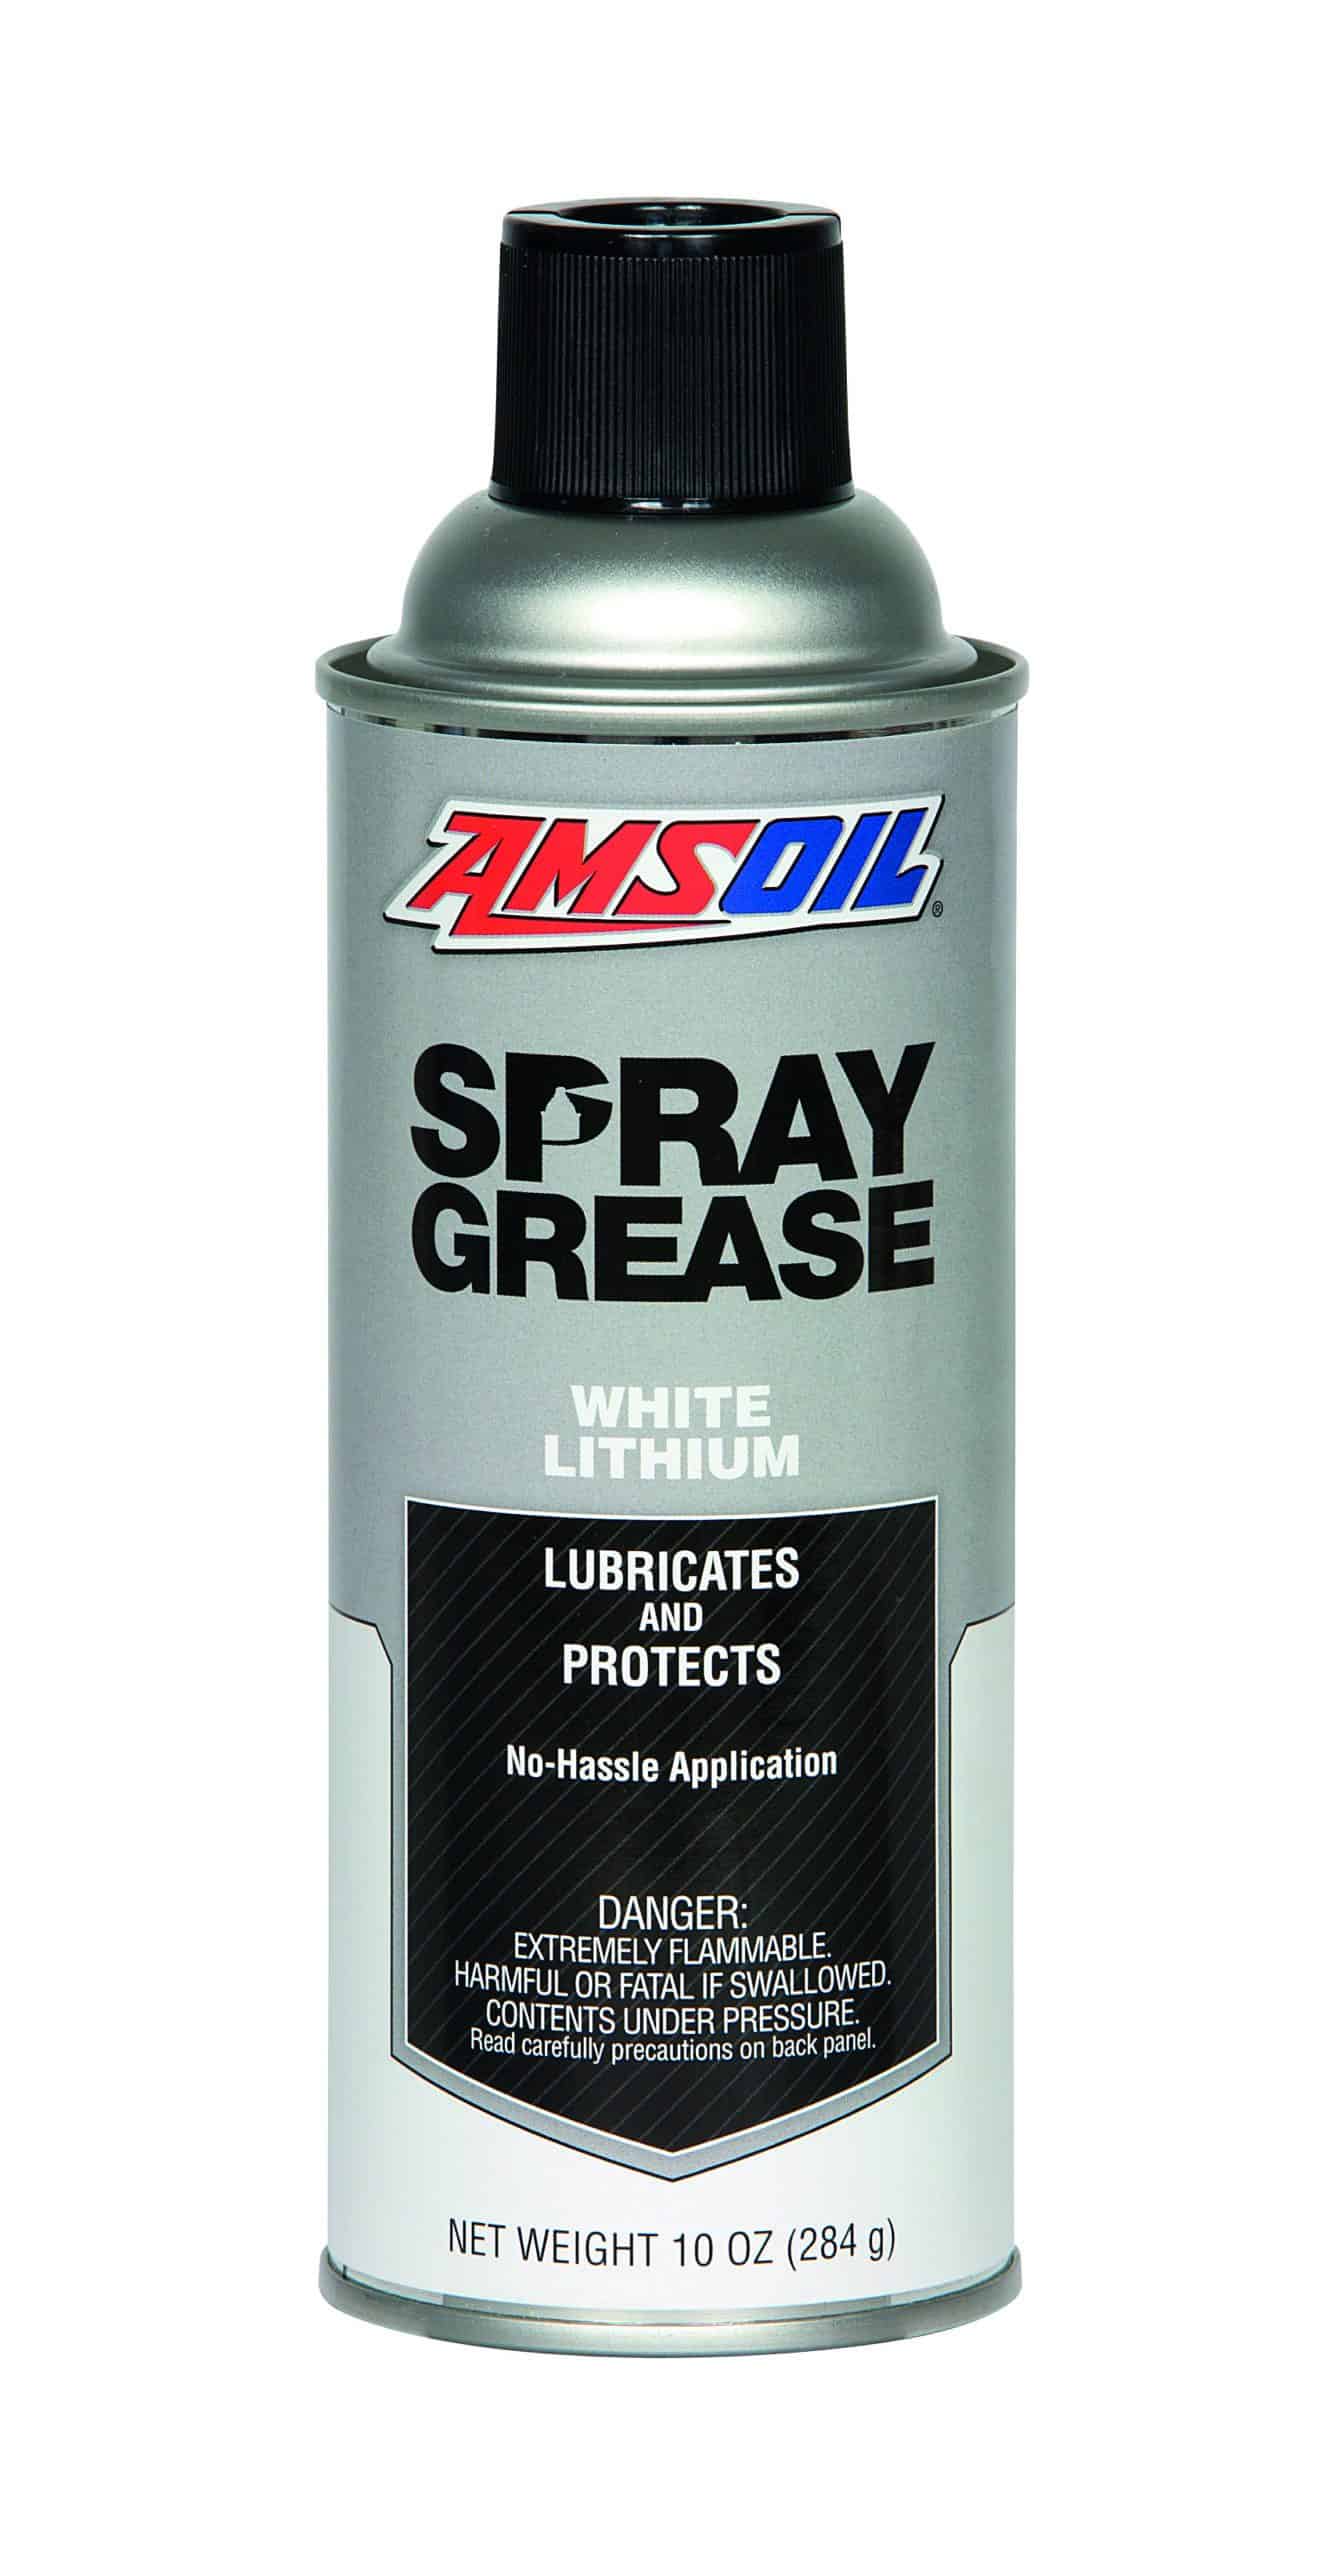 A can of AMSOIL Spray Grease, designed to effectively reduce friction & wear, keeping components running clean, trouble-free for outstanding performance and long life.